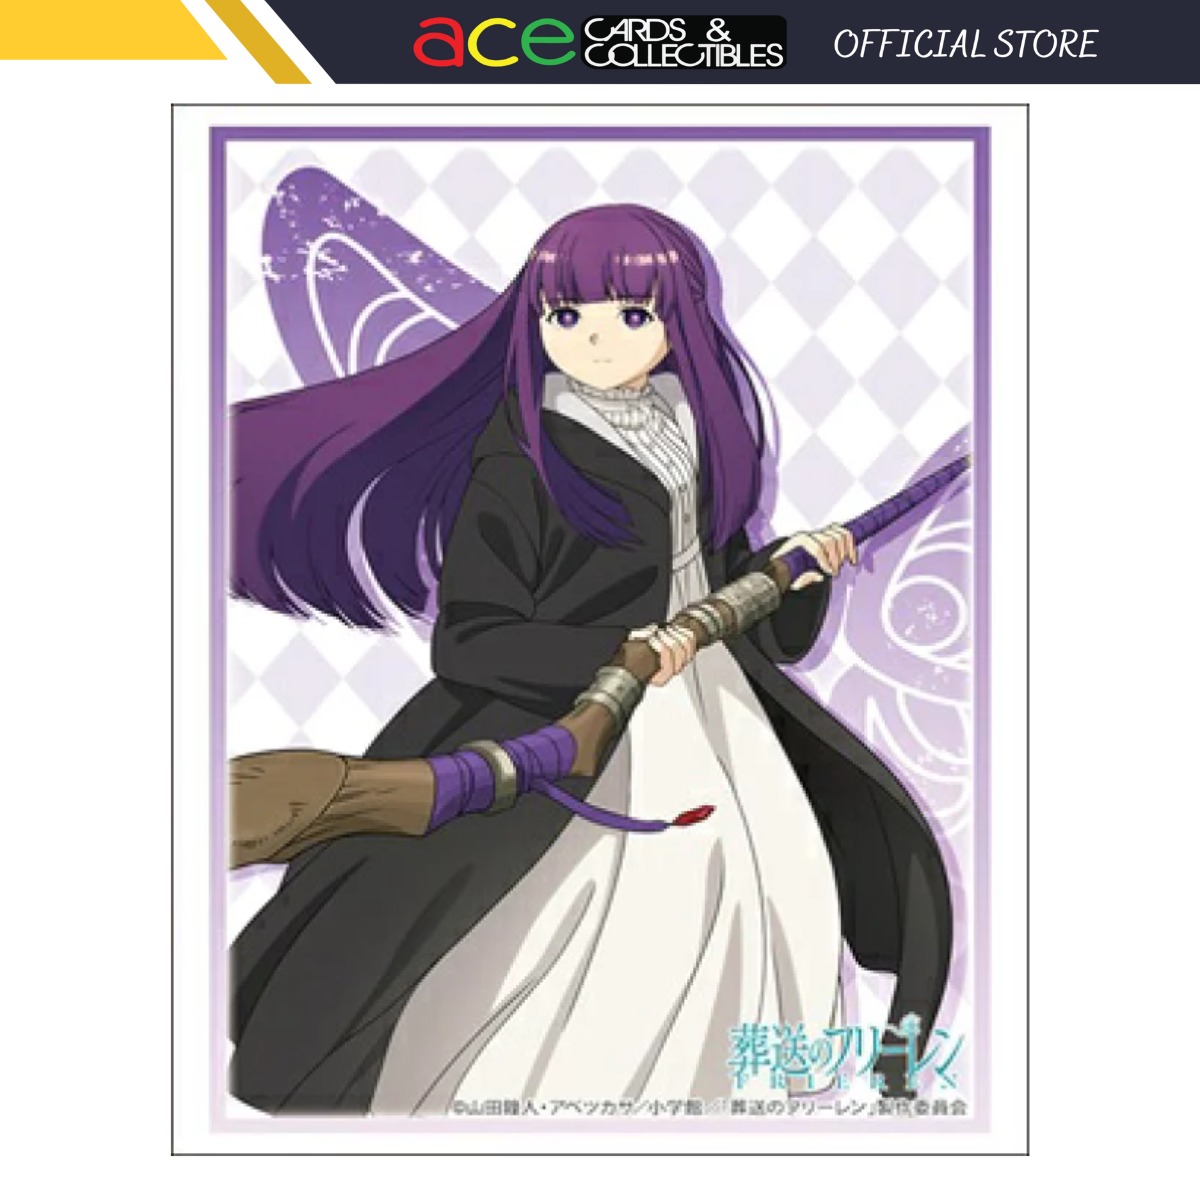 Bushiroad Sleeves Collection -Frieren: Beyond Journey&#39;s End- &quot;Fern&quot; (Vol.4151)-Bushiroad-Ace Cards &amp; Collectibles